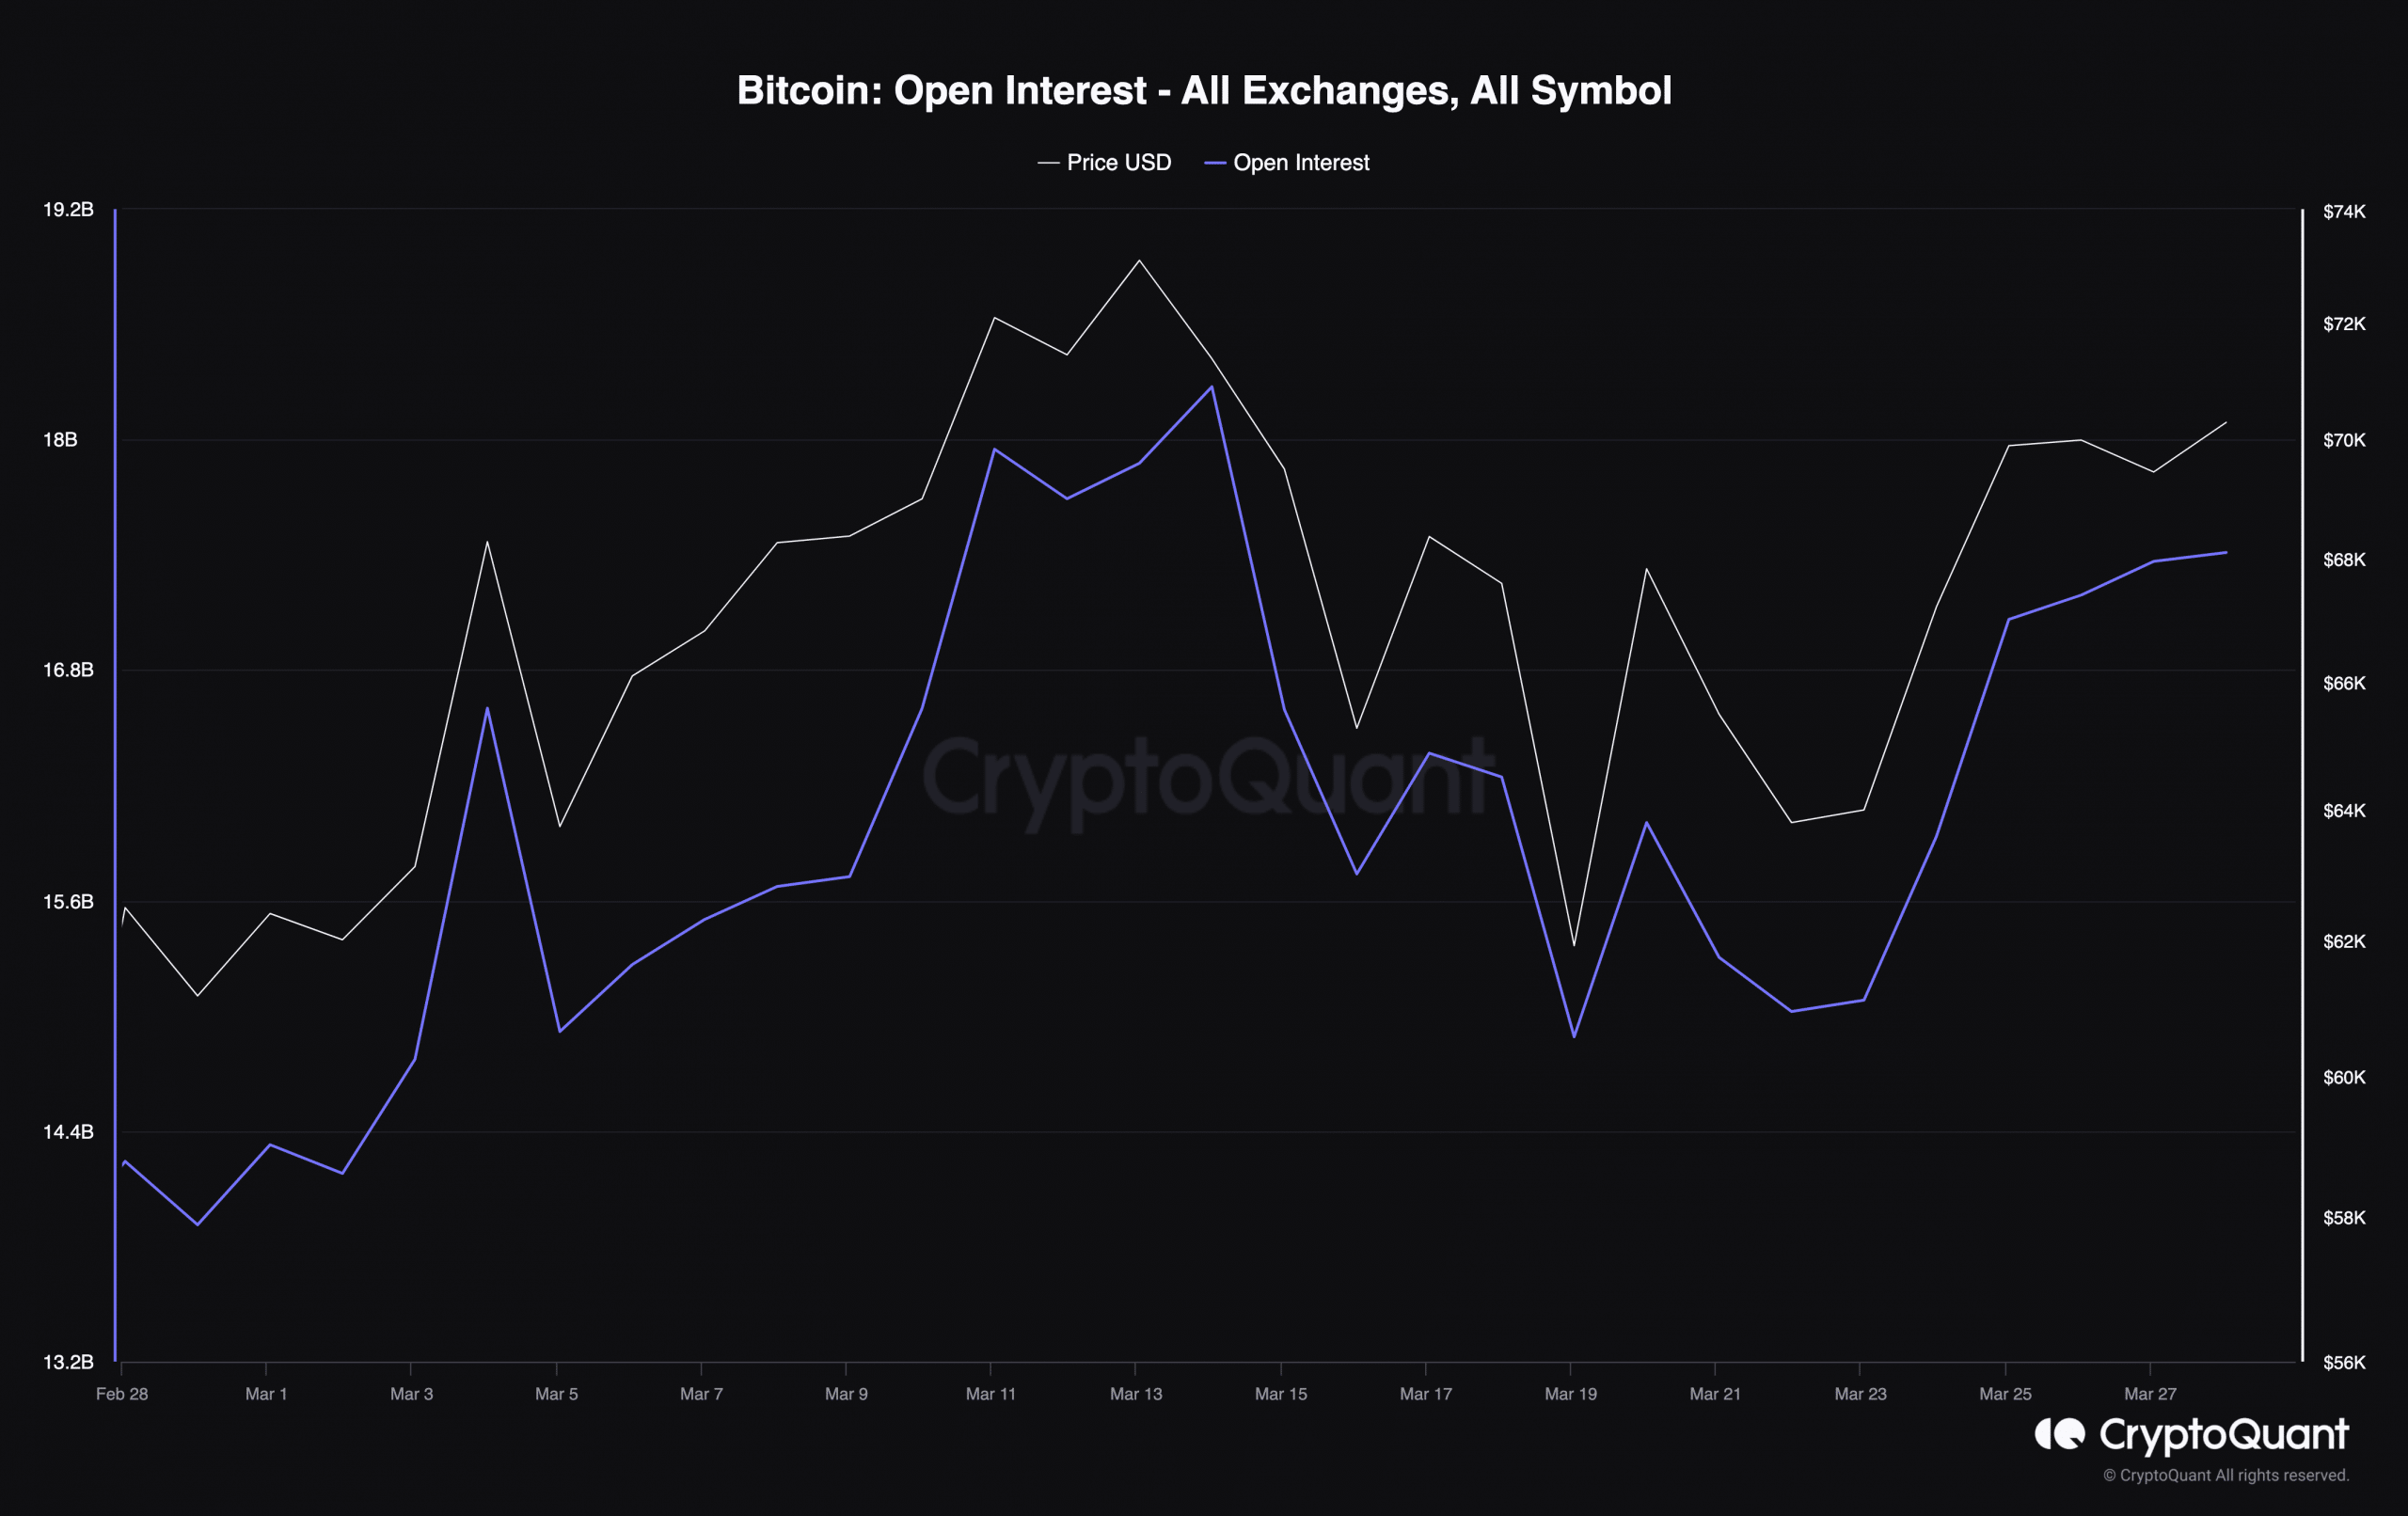 Bitcoin's rising open interest, indicating a possible price increase